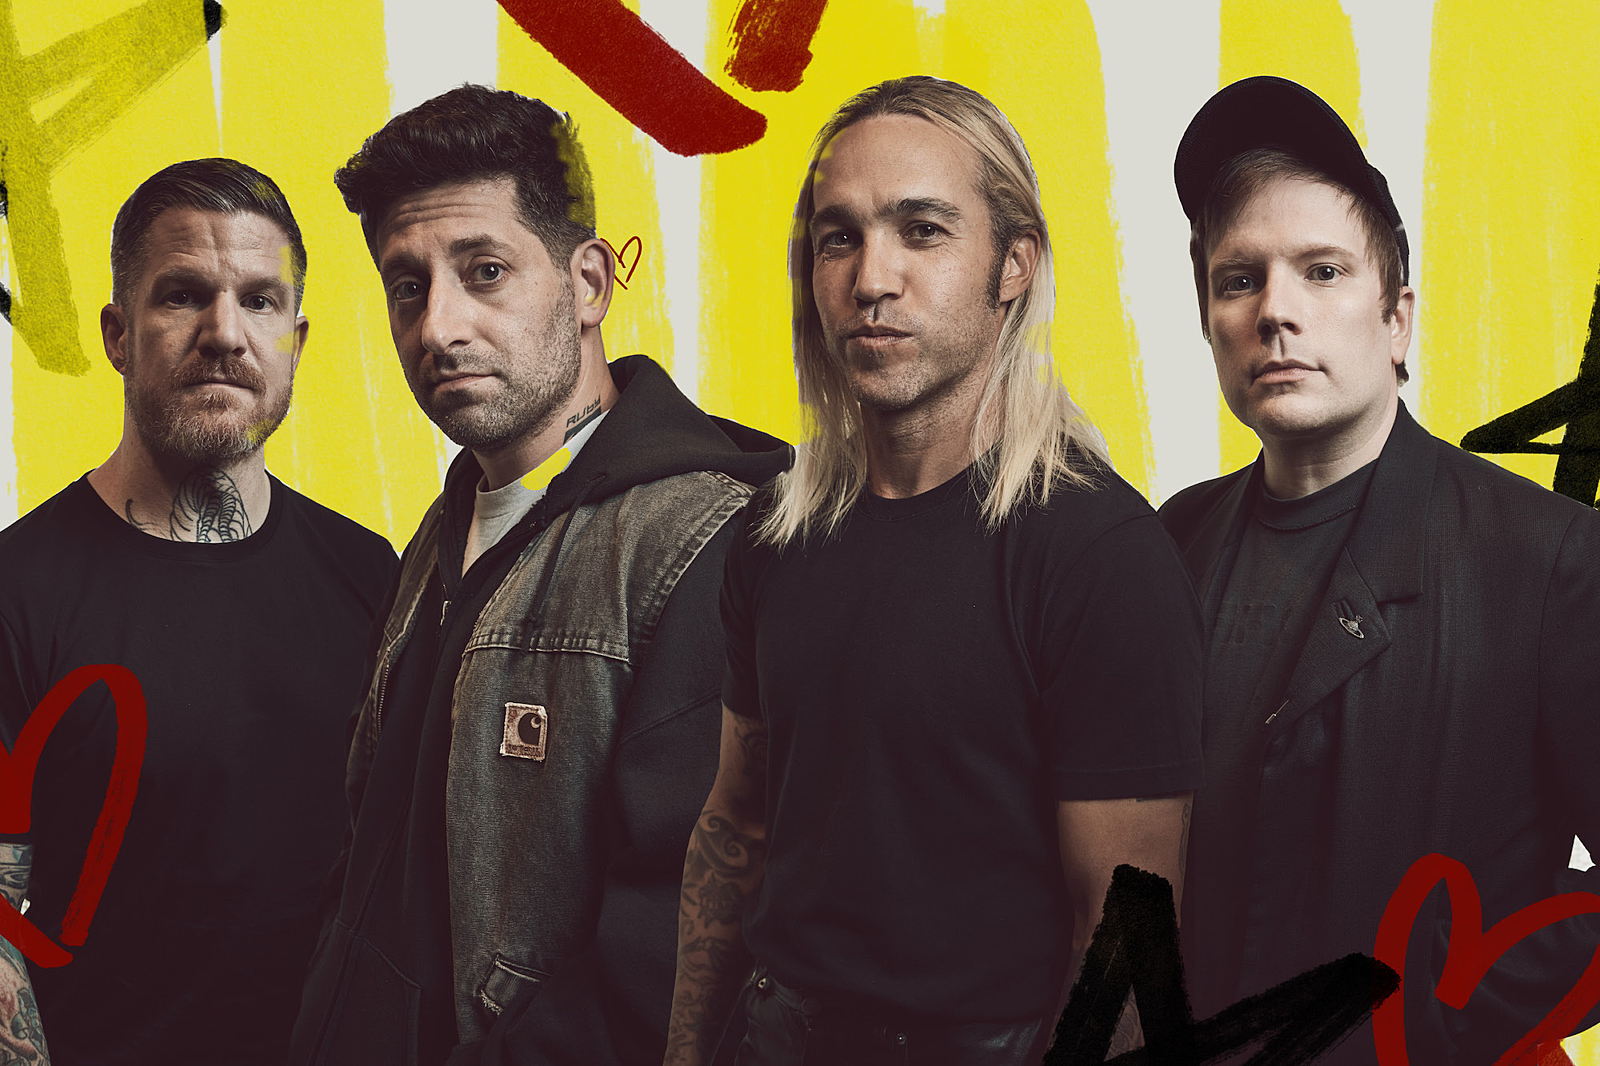 Fall Out Boy cover DIY's March 2023 issue